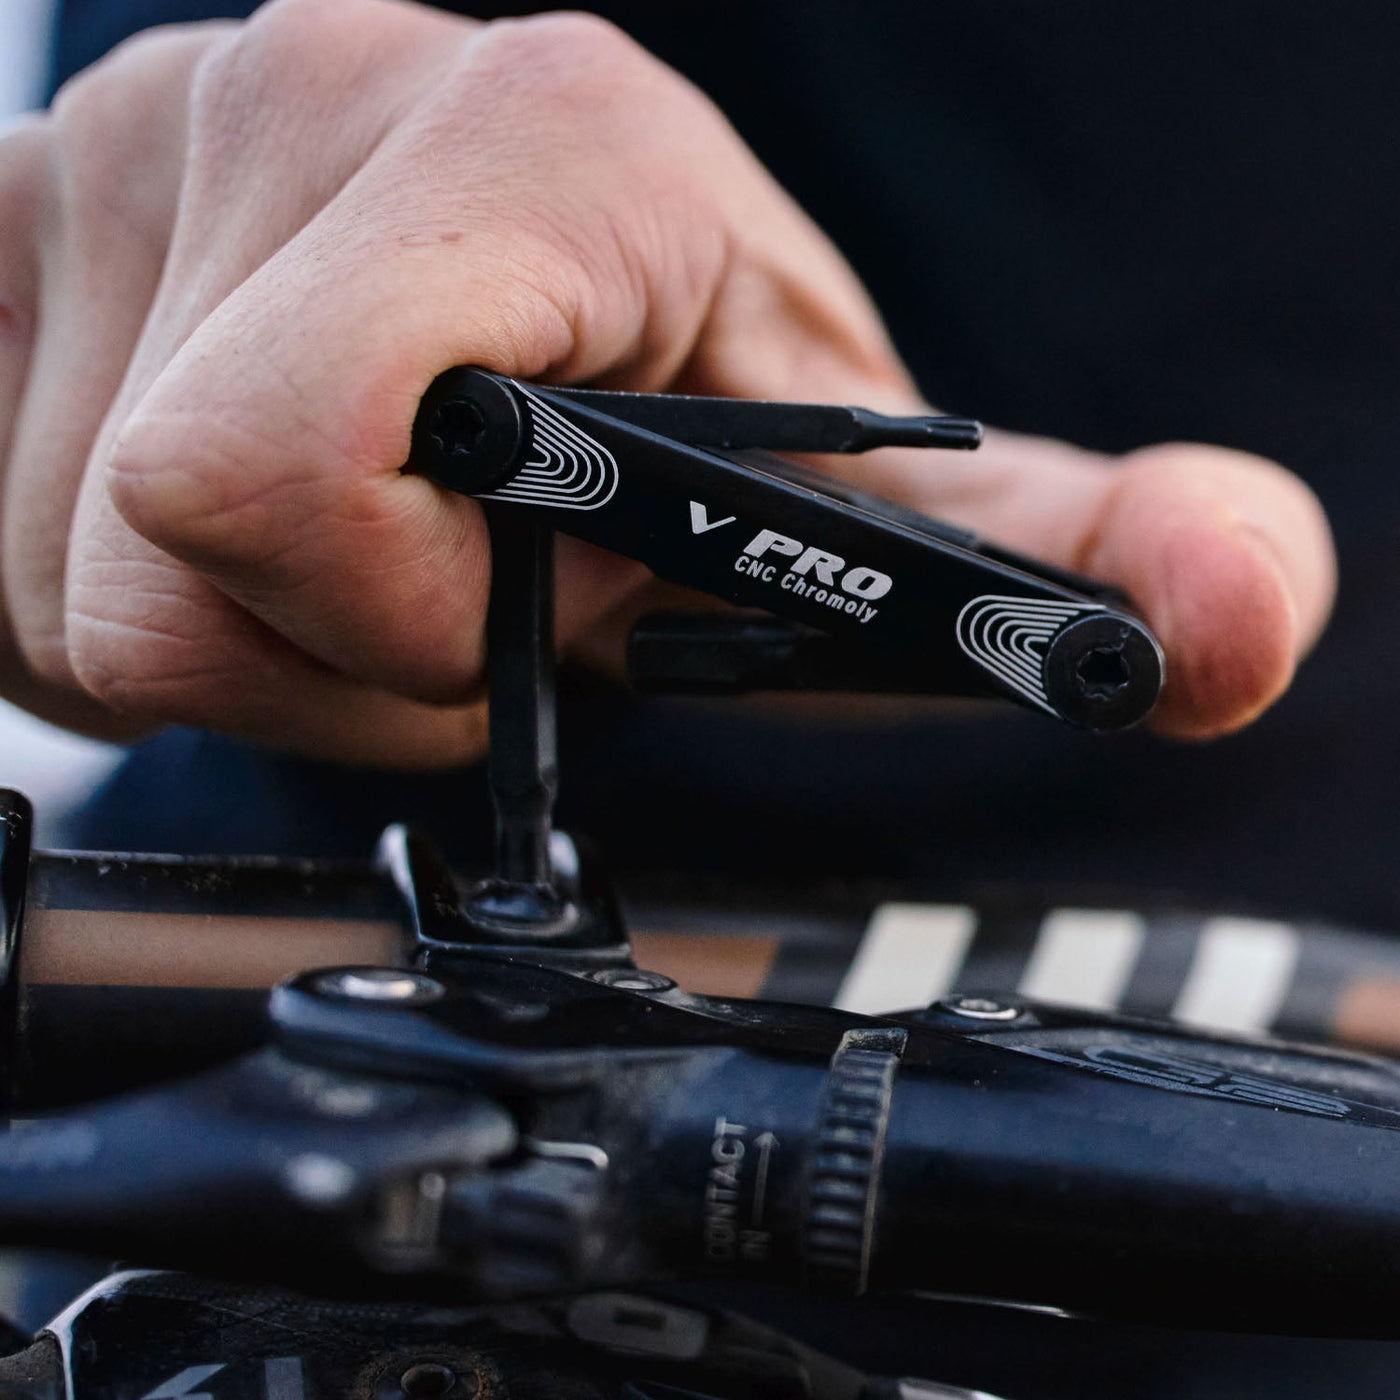 Lezyne V Pro 13 Multitool - 13 Functions - Cyclop.in